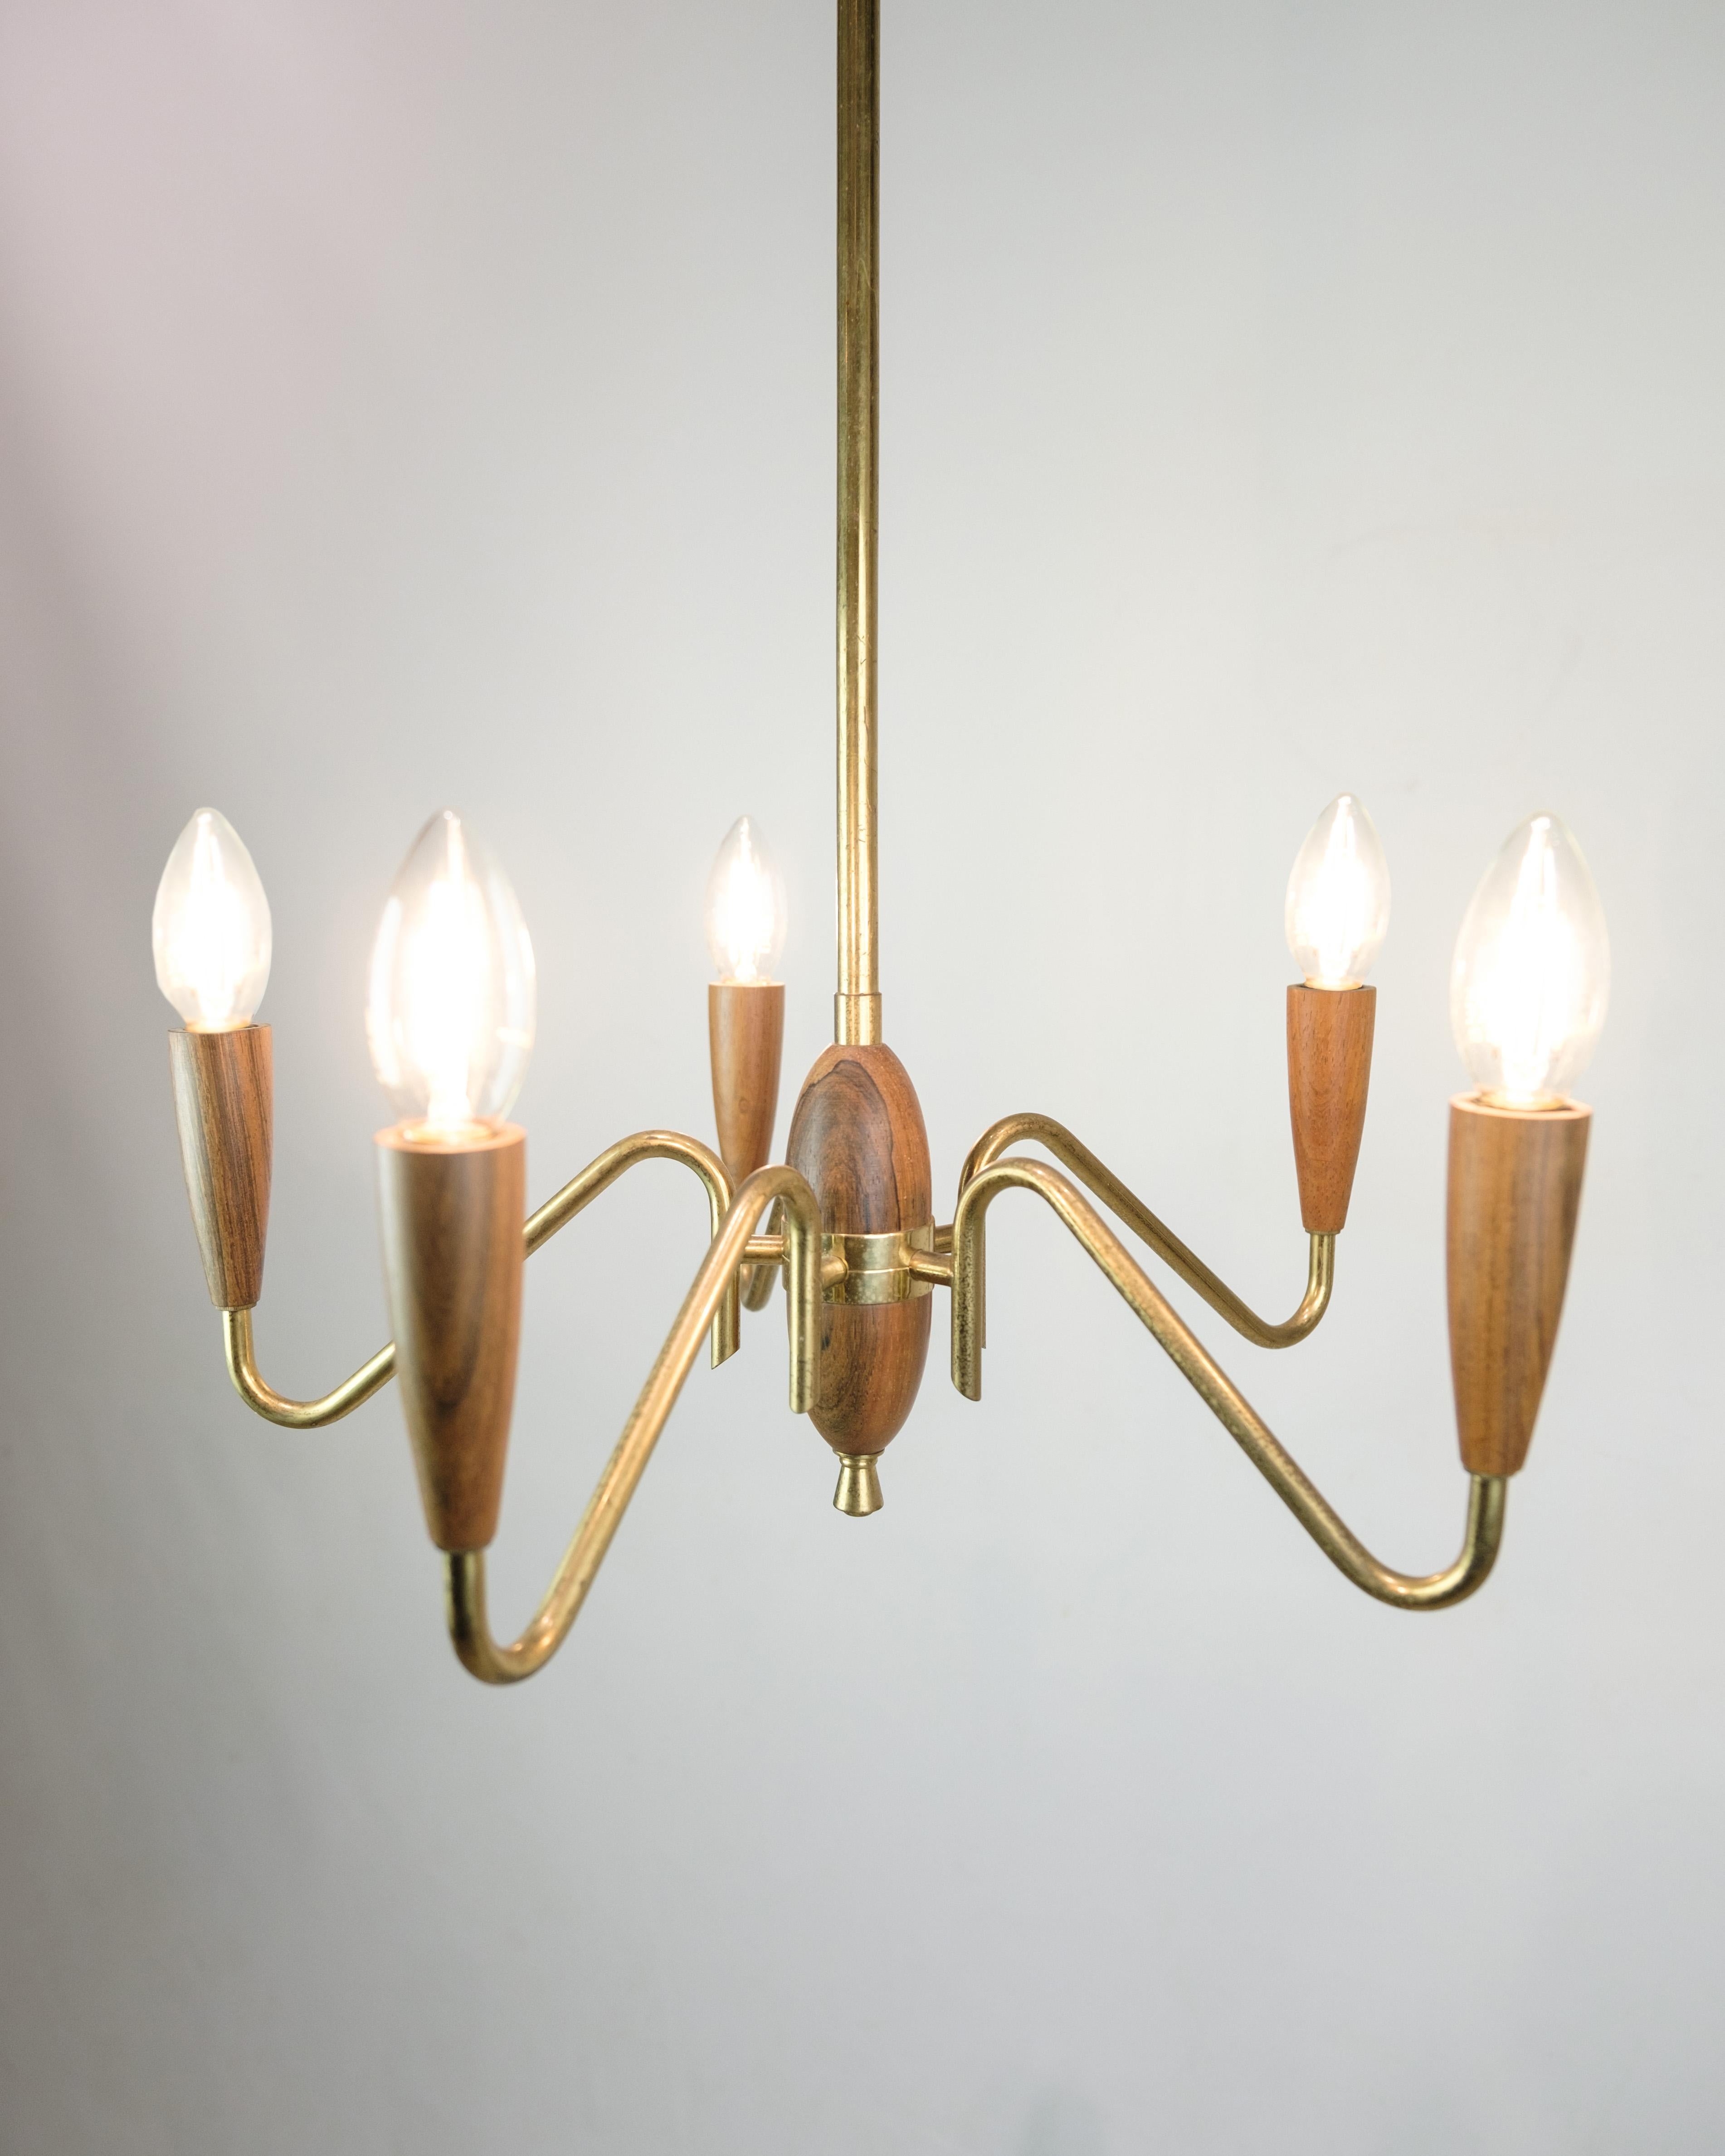 Chandelier Made In Teak & Brass From 1960s In Good Condition For Sale In Lejre, DK